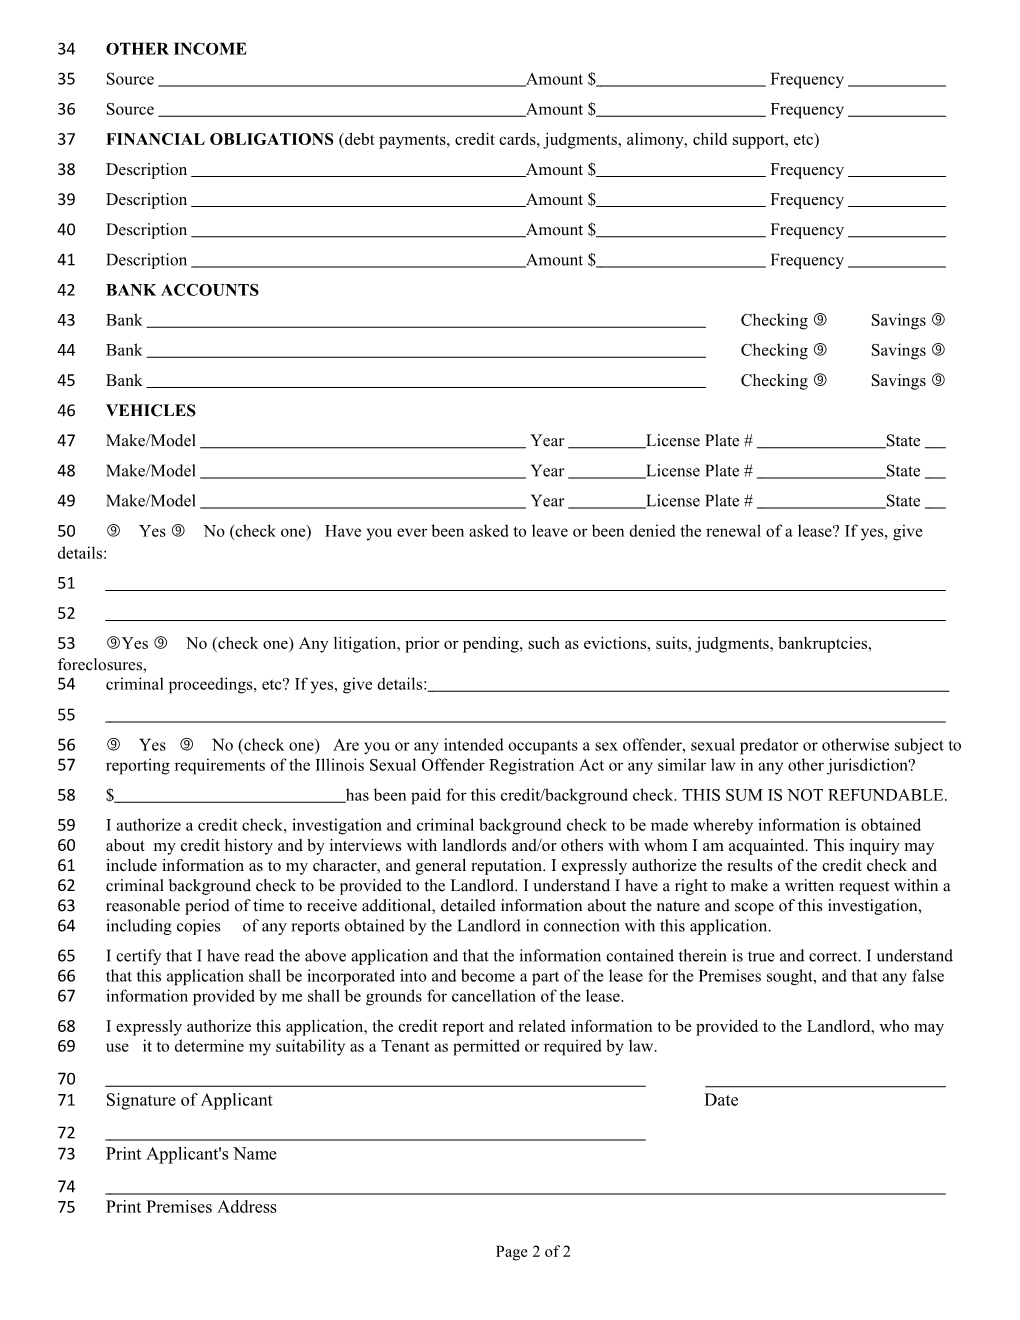 RANWC Residential Lease Application 02-01-11